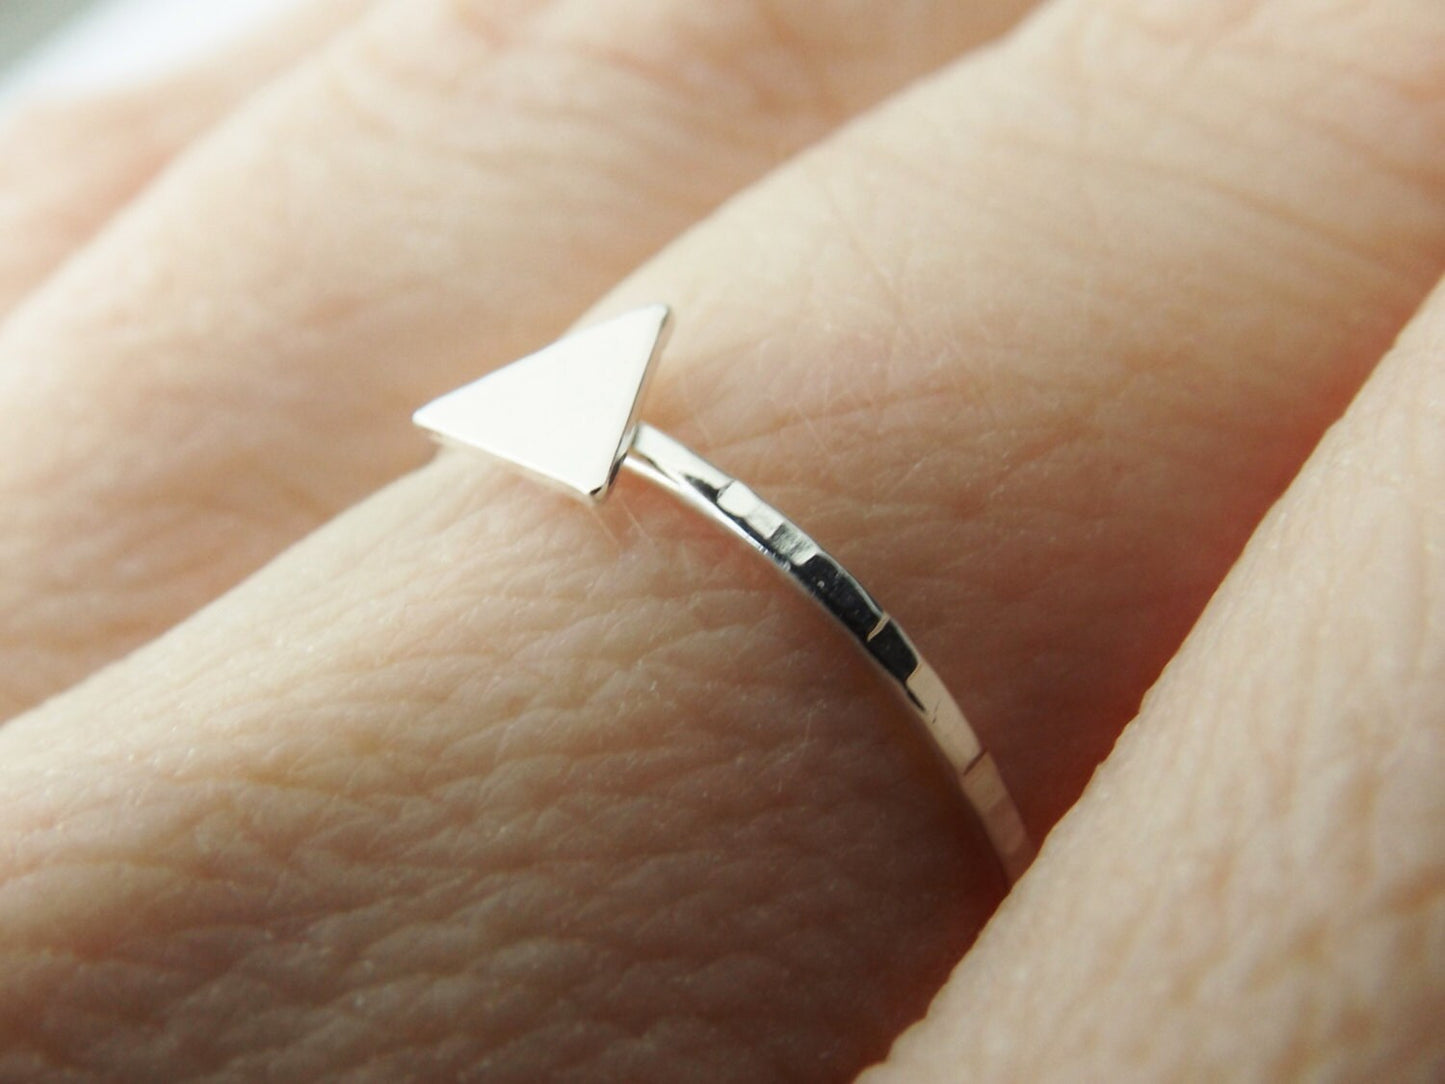 Skinny Triangle Ring,Simple Traingle Ring,Modern Geometric Ring,Initial Ring,Personalized Jewelry,Silver Triangle Ring,Minimalist Jewelry